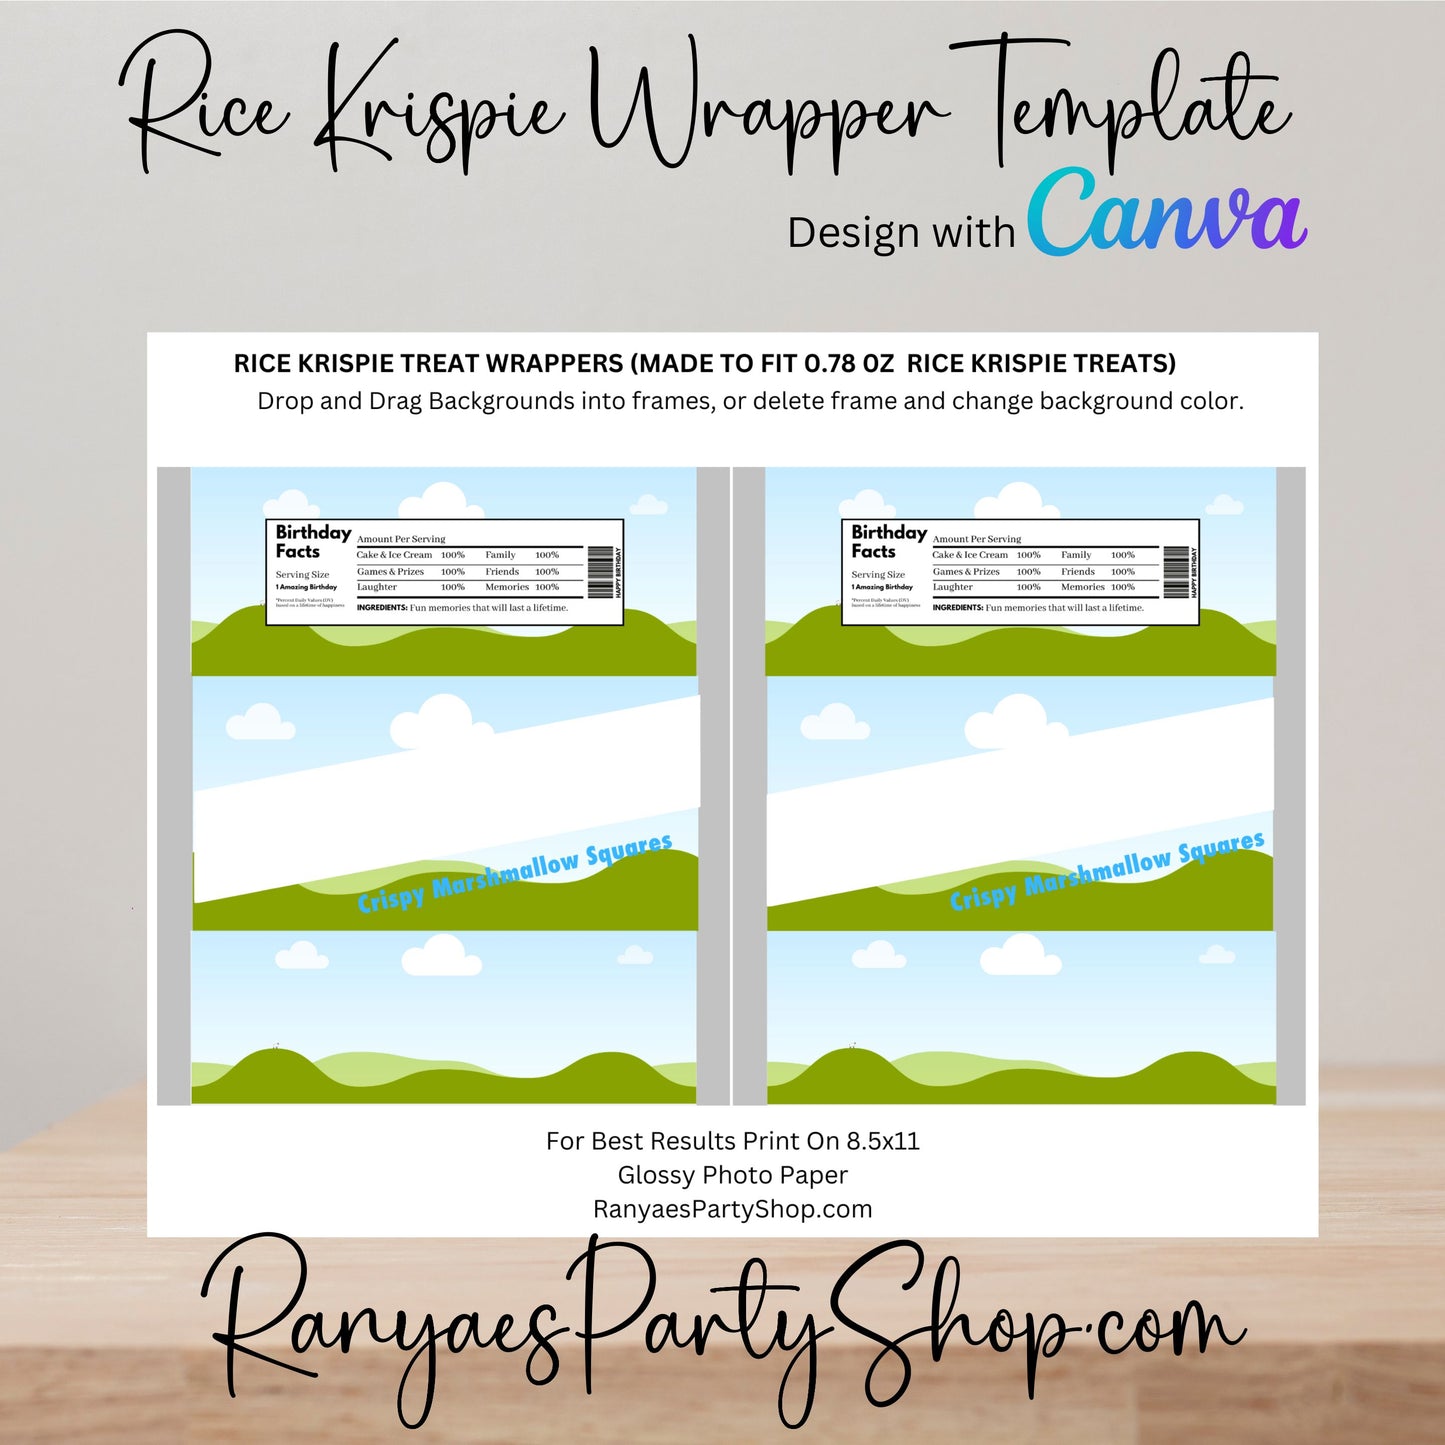 Rice Krispie Wrapper Template | Create Your Own Rice Krispie Wrapper | Blank Templates | You Design | Design with Canva | Canva Template